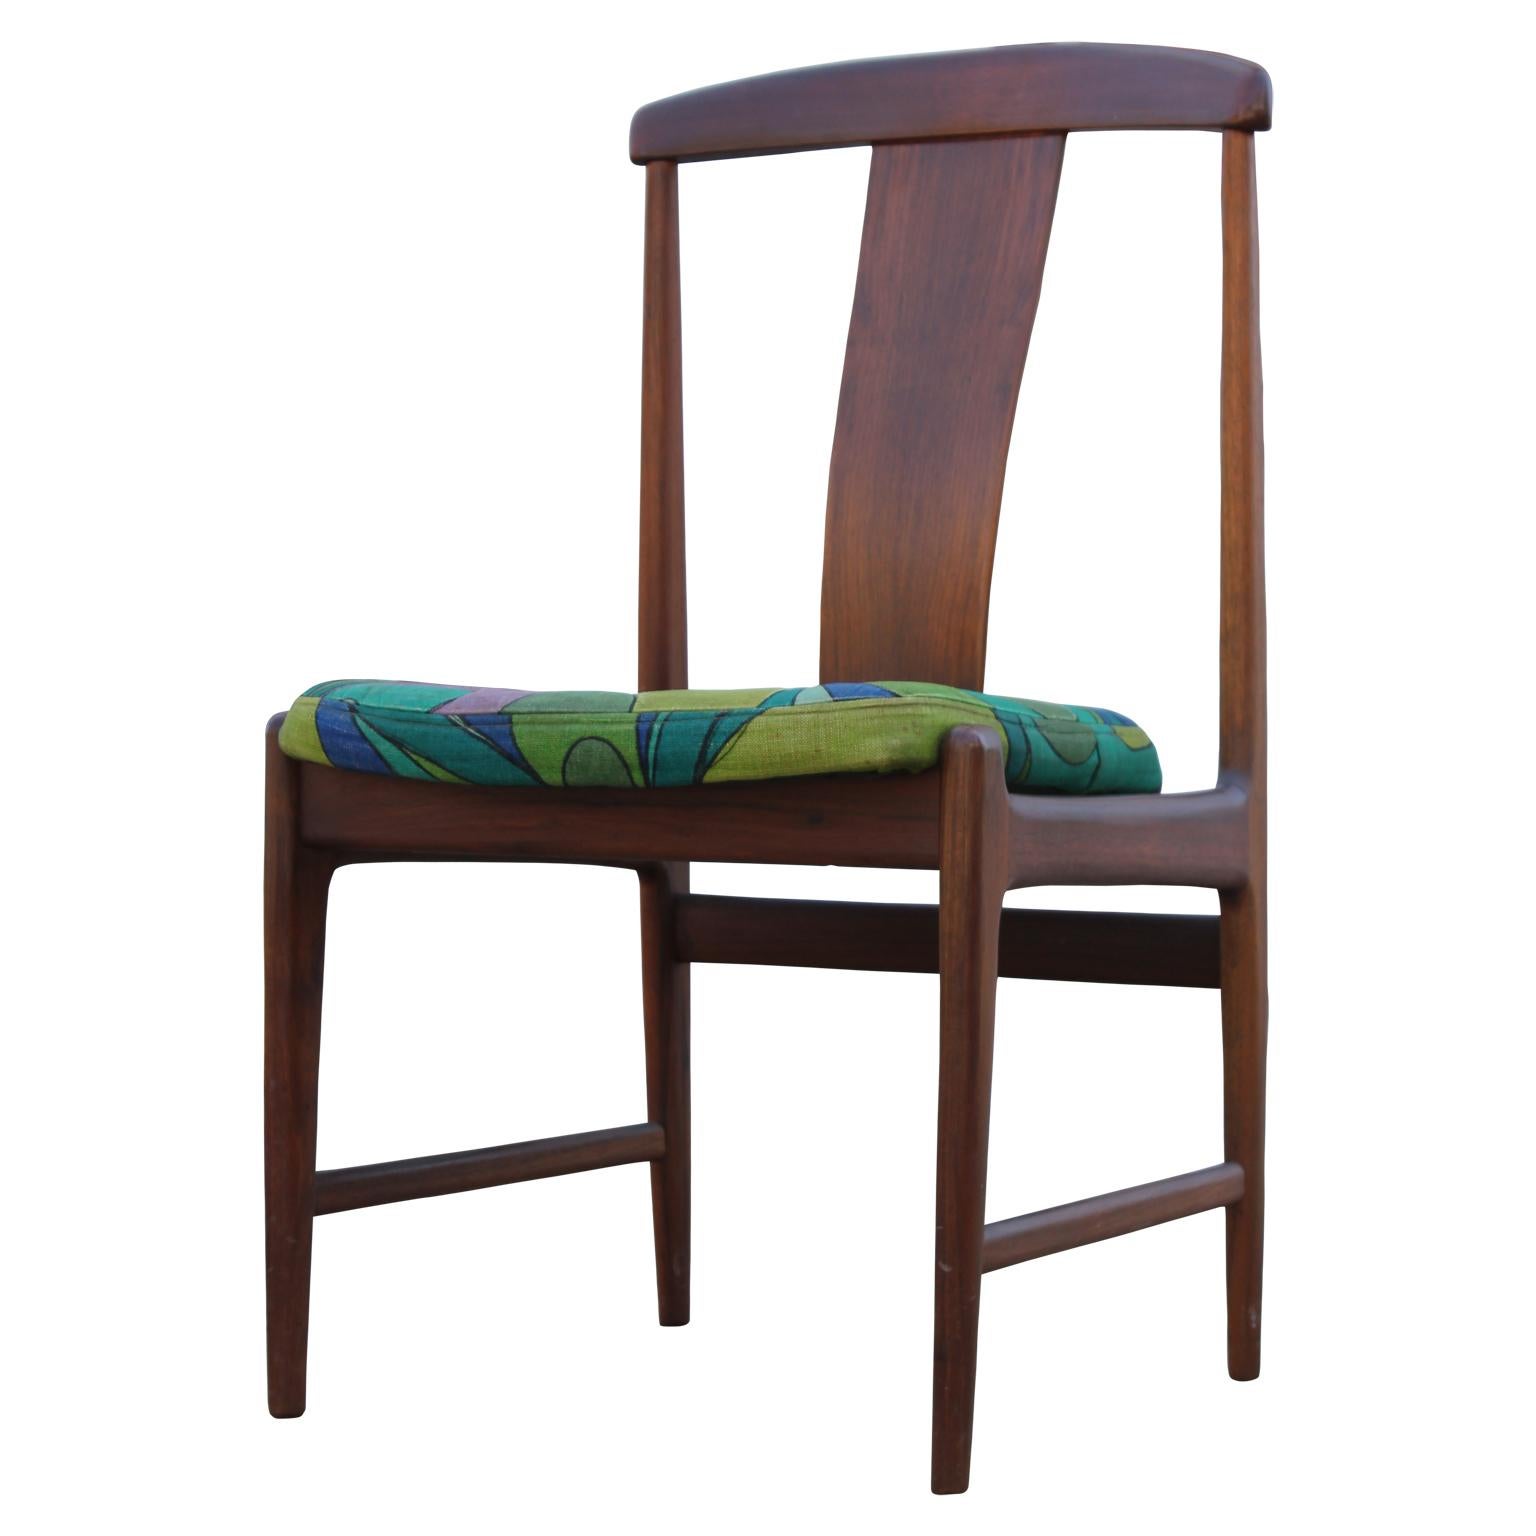 Set of four beautiful Mid-Century Modern dining chairs. They're by Folke Ohlsson for DUX and made from teak. The seat cushions can be reupholstered with COM.